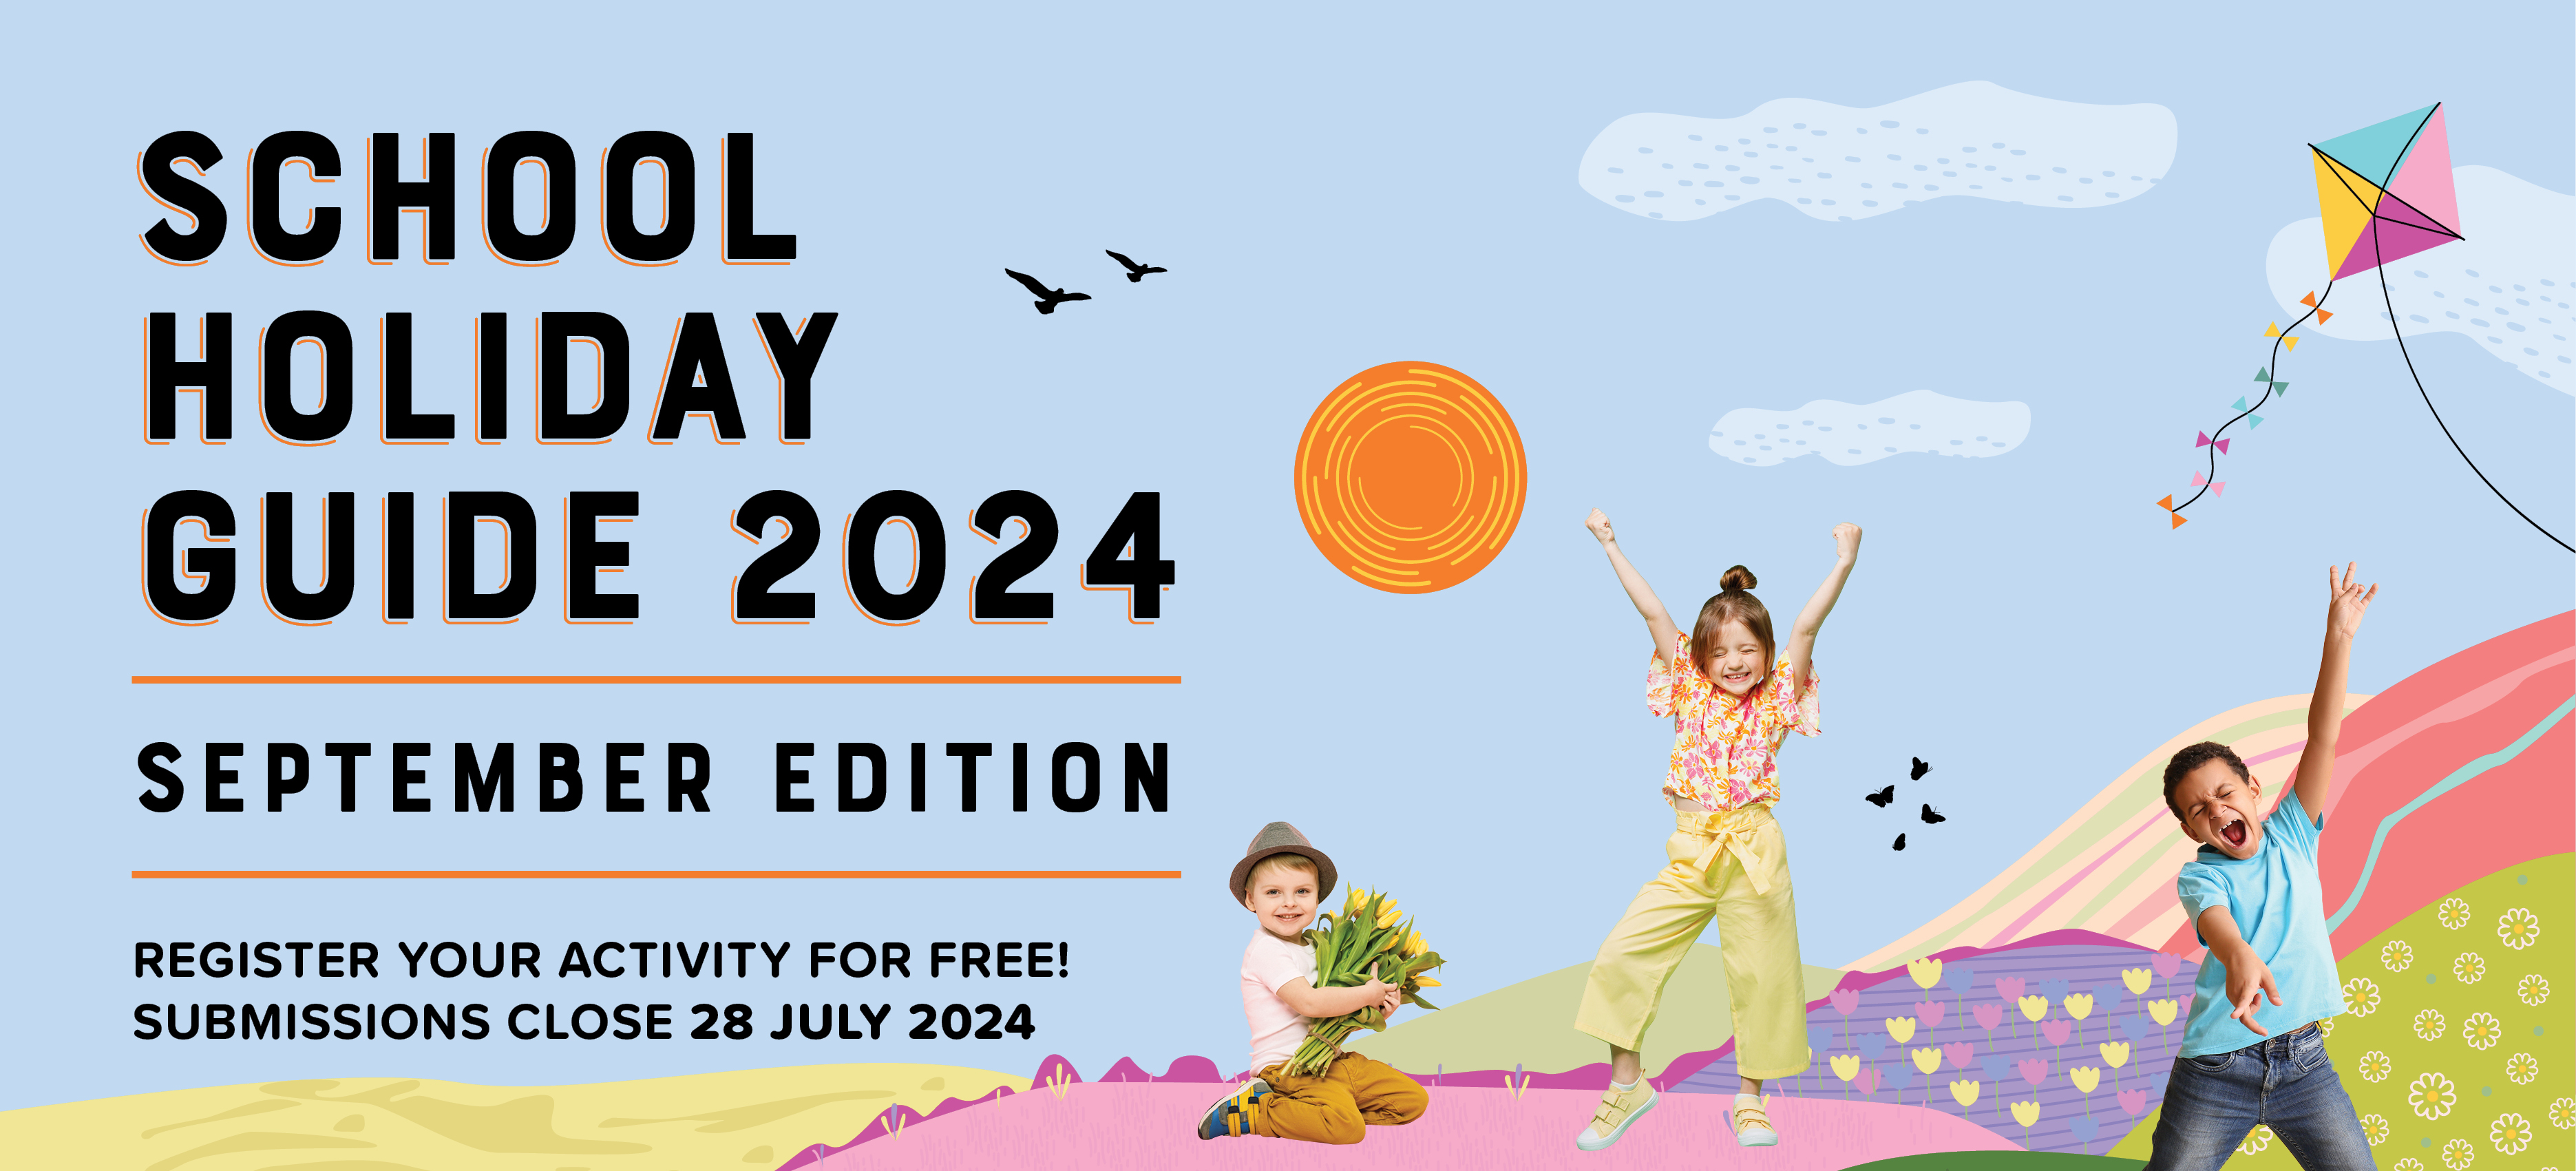 School Holiday Guide 2024 - June July Edition - Download Your Free Copy Now!